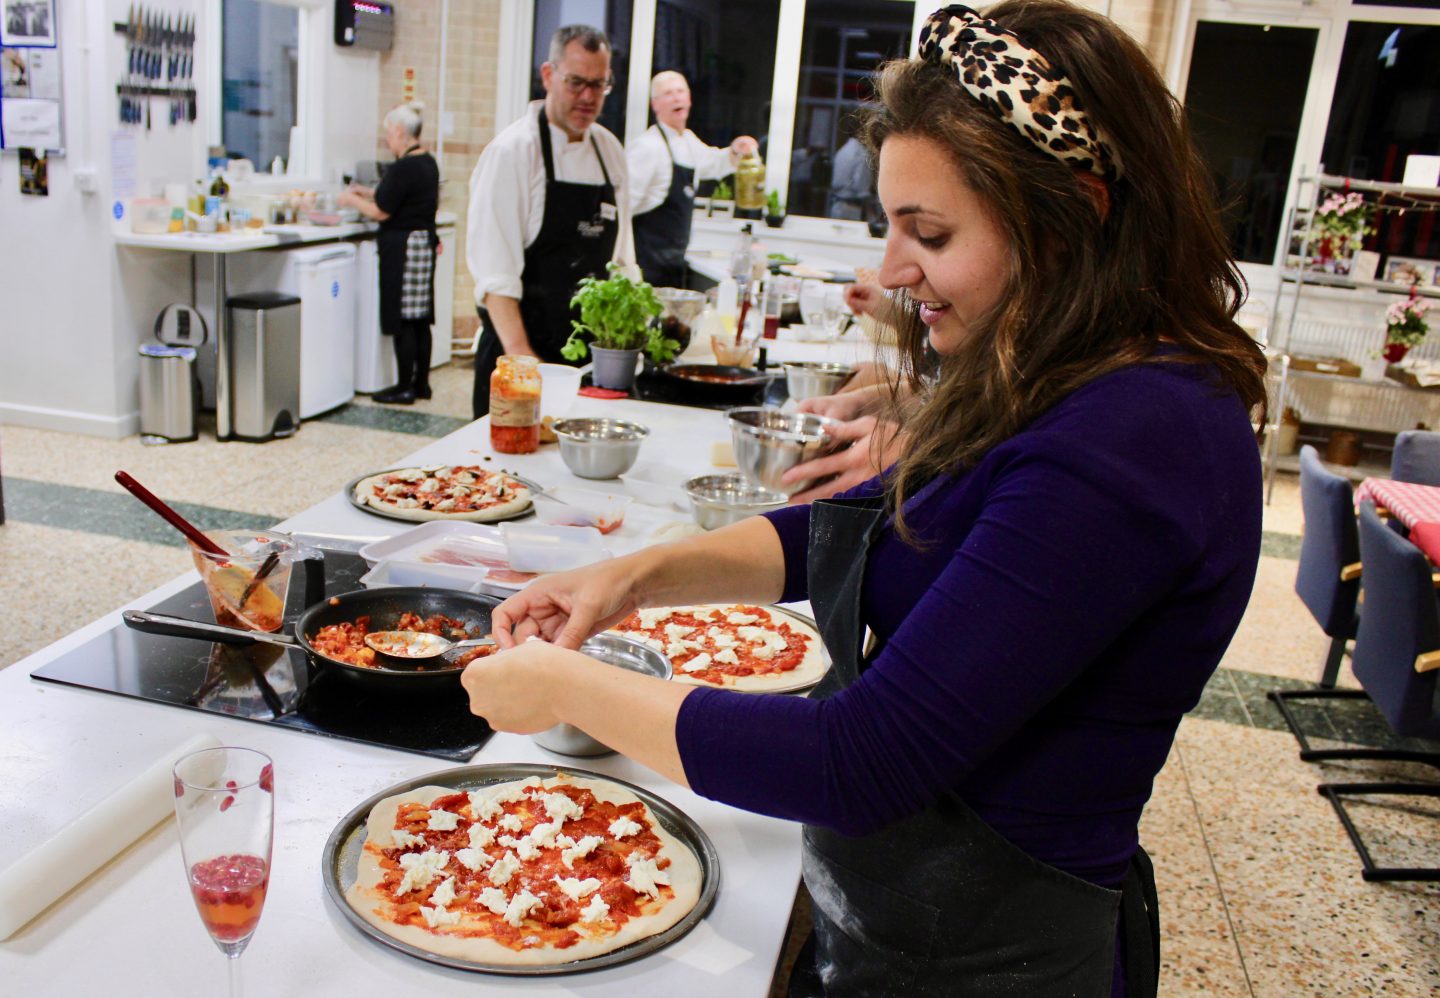 pizza making class leeds cookery school: Nell in blue dress with leopard print headband concentrating on topping her pizza during the pizza making class